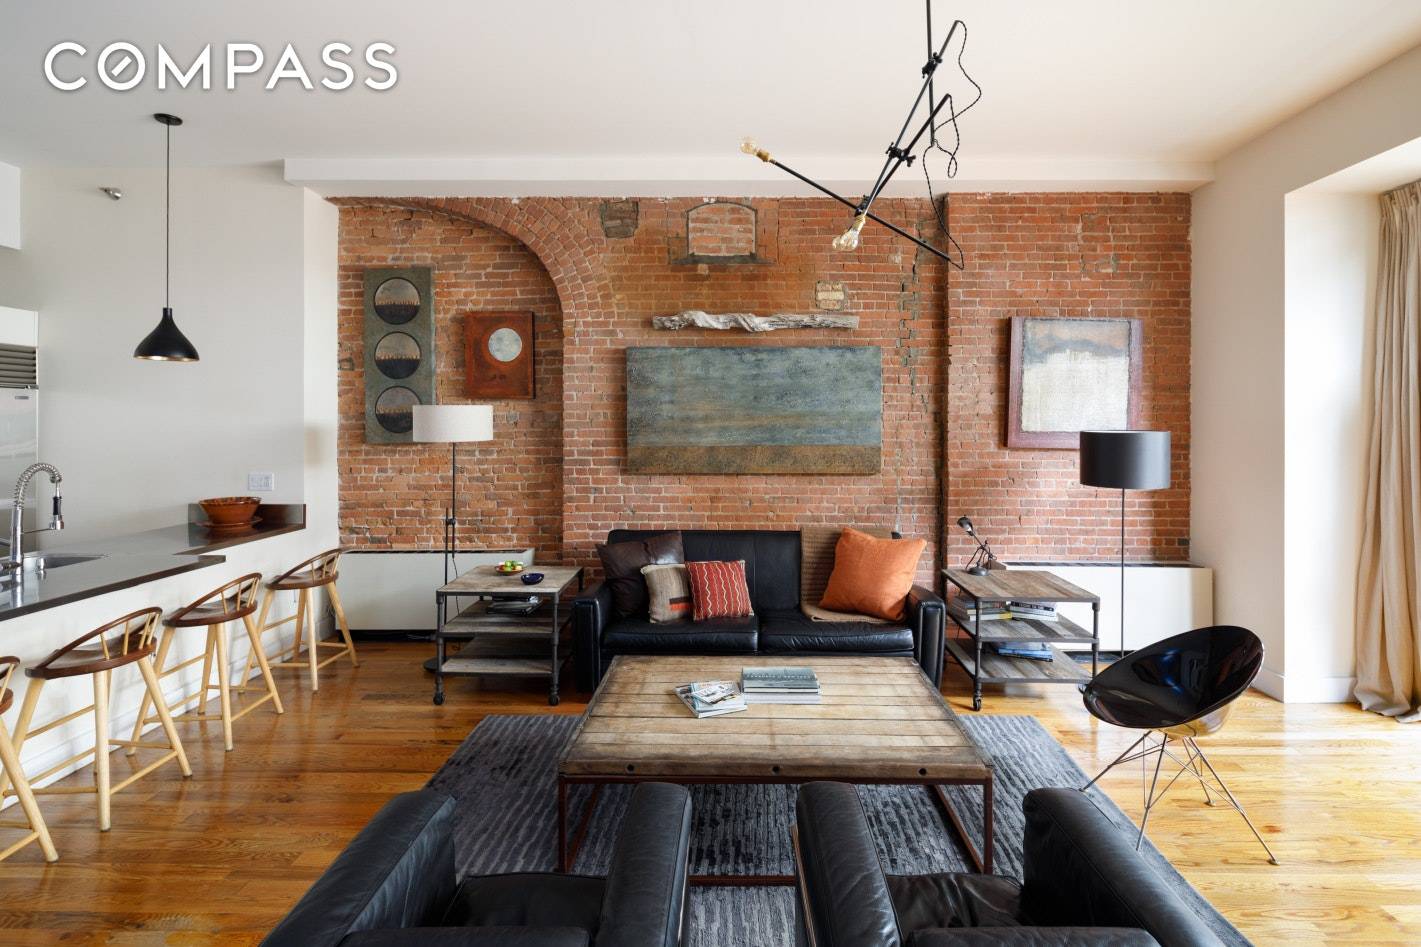 This flawless 1447 sf loft opens onto a private terrace.